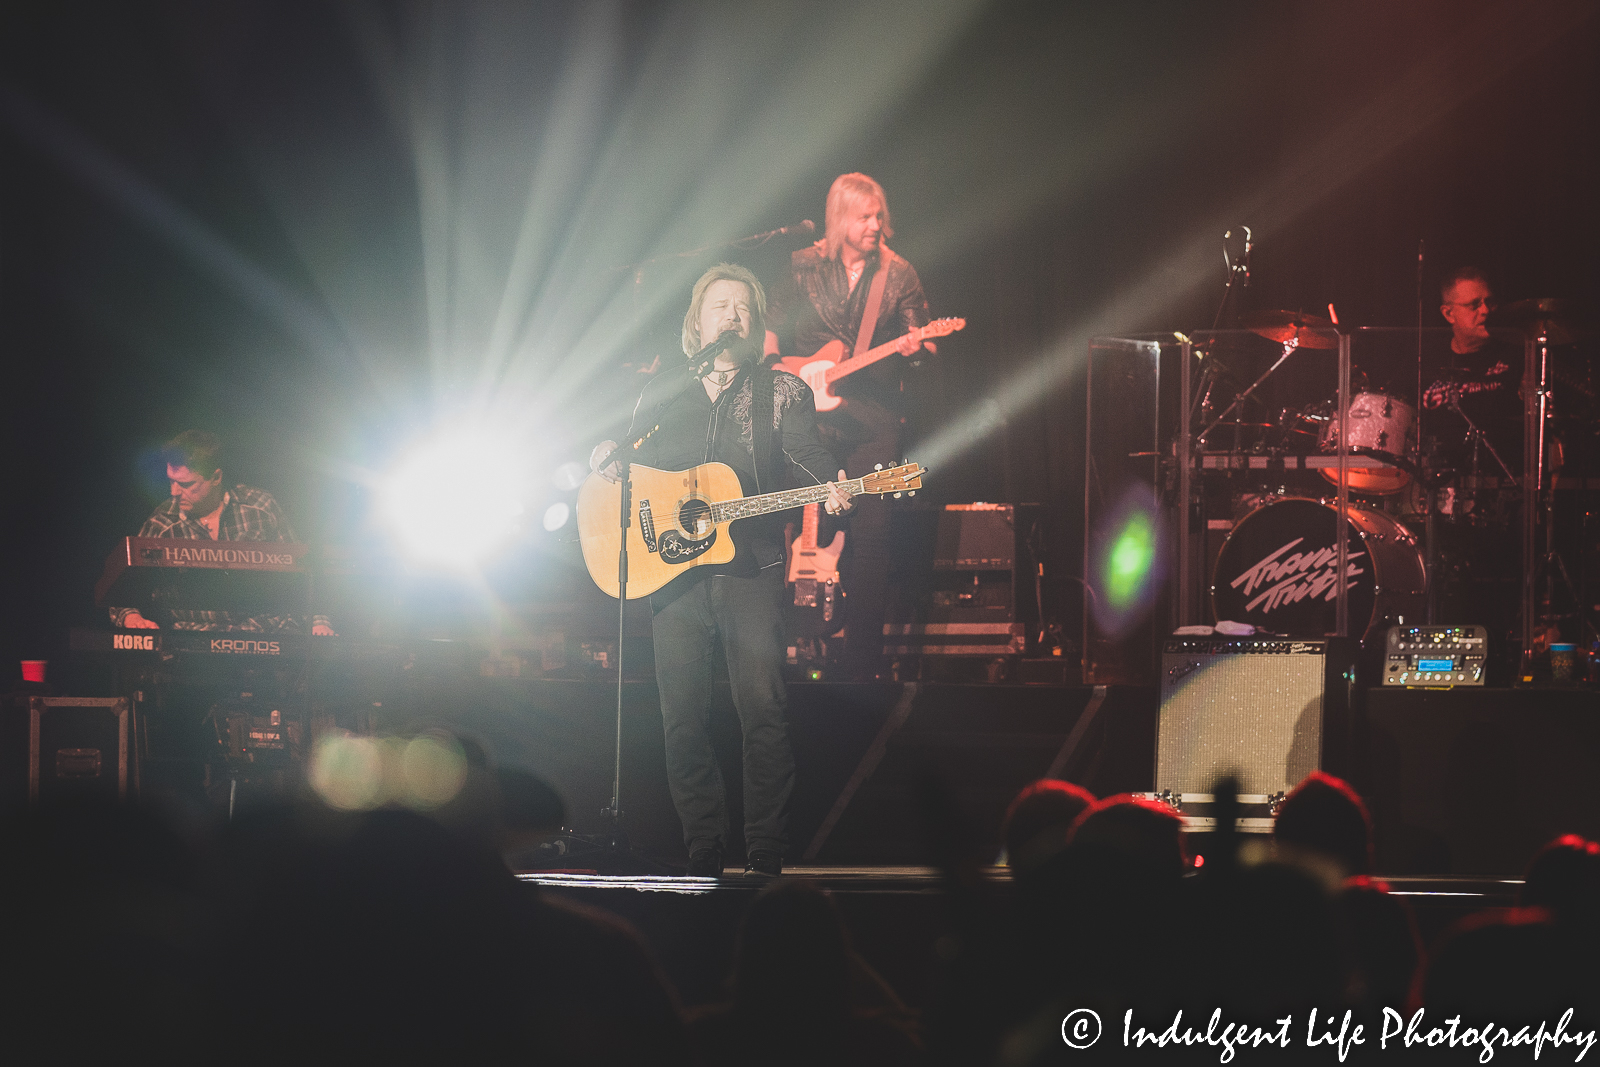 Live concert at Star Pavilion inside of Ameristar Casino in Kansas City, MO featuring Travis Tritt and his band on December 10, 2022.